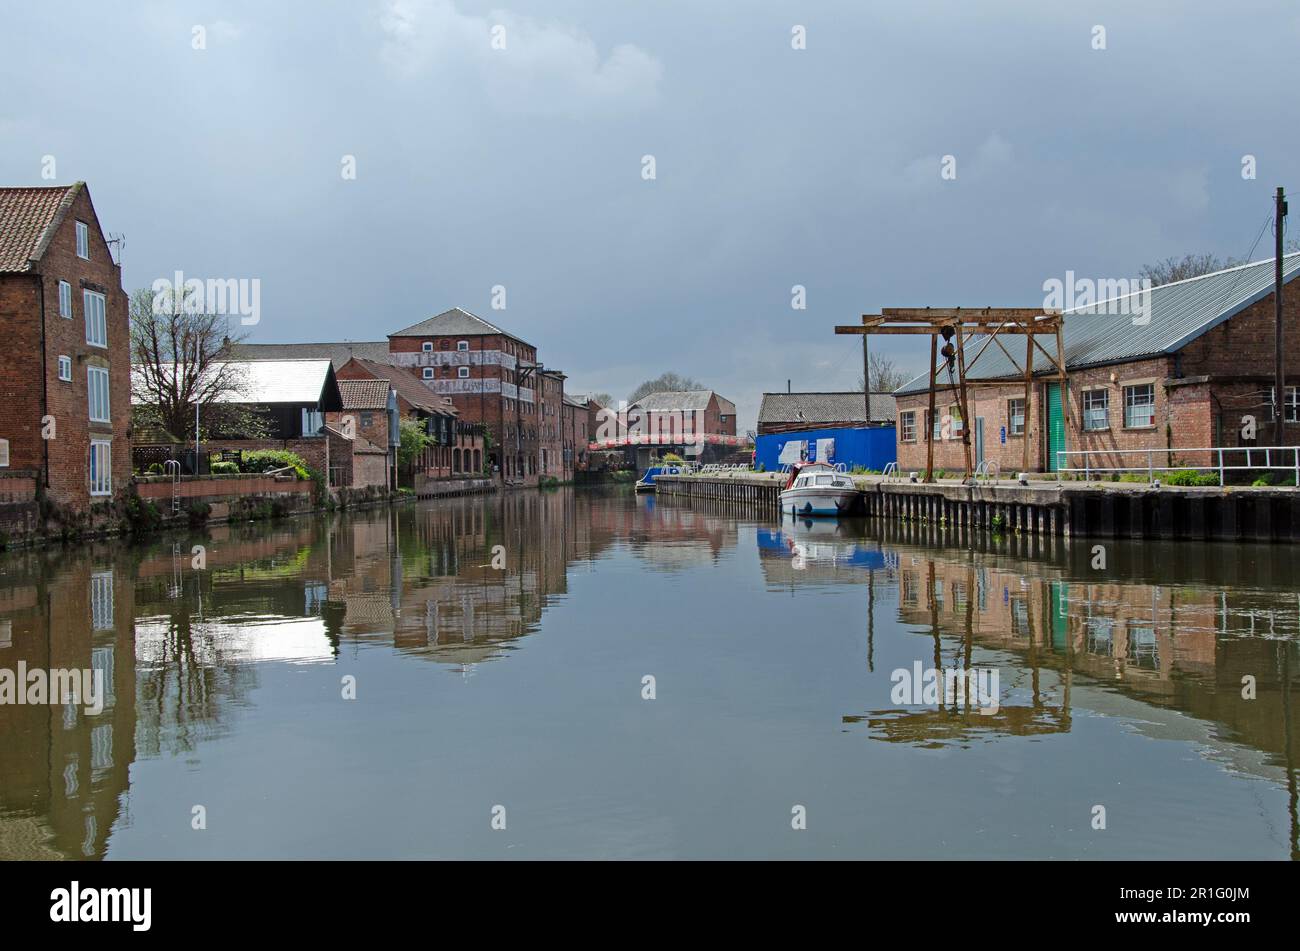 Old warehouses and wharfs on the River Trent, Newark-on-Trent. Dockyard and repair yards on the River Trent Stock Photo